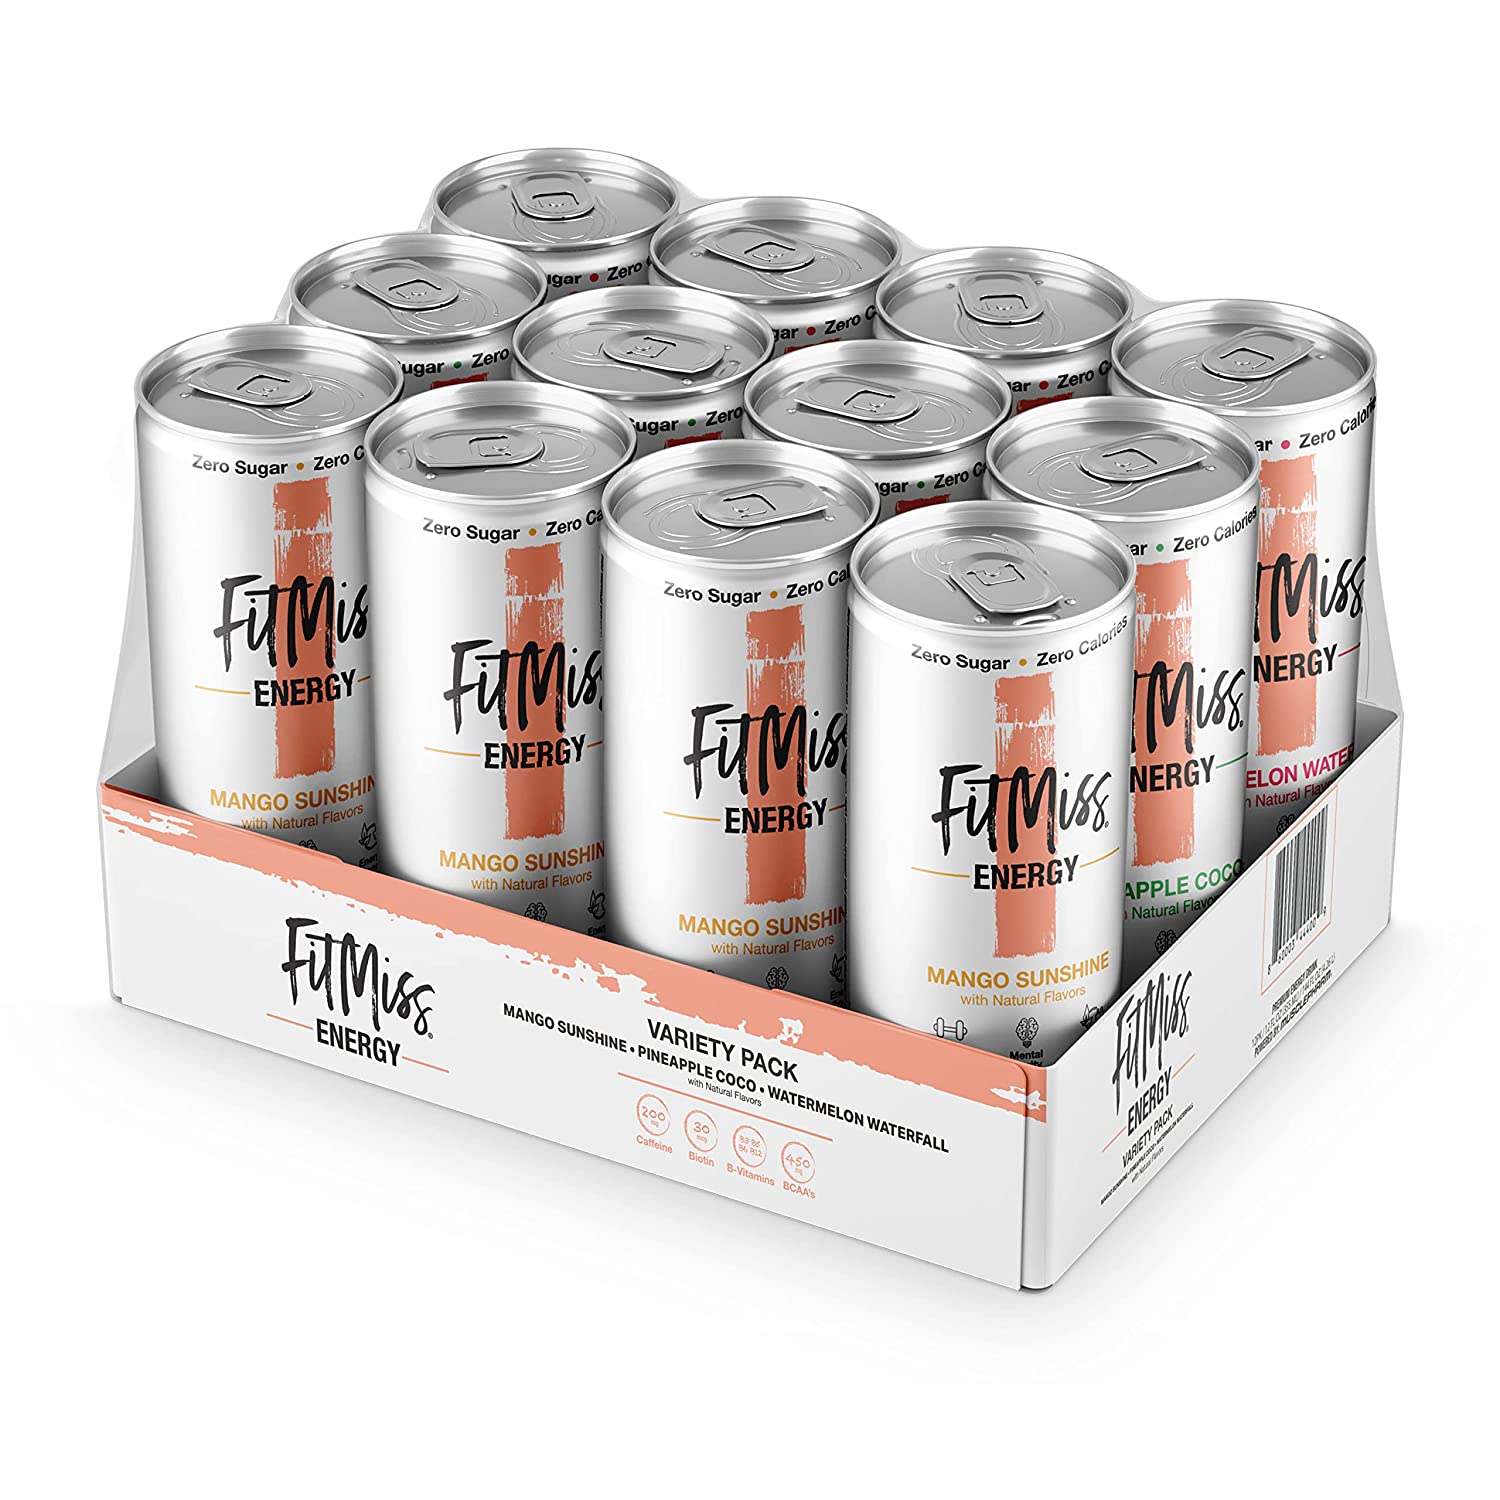 12-Pack 12-Oz MusclePharm FitMiss Energy Drink Variety Pack (Mango, Pineapple Coconut, Watermelon) $15 + Free S&H w/ Prime or $25+